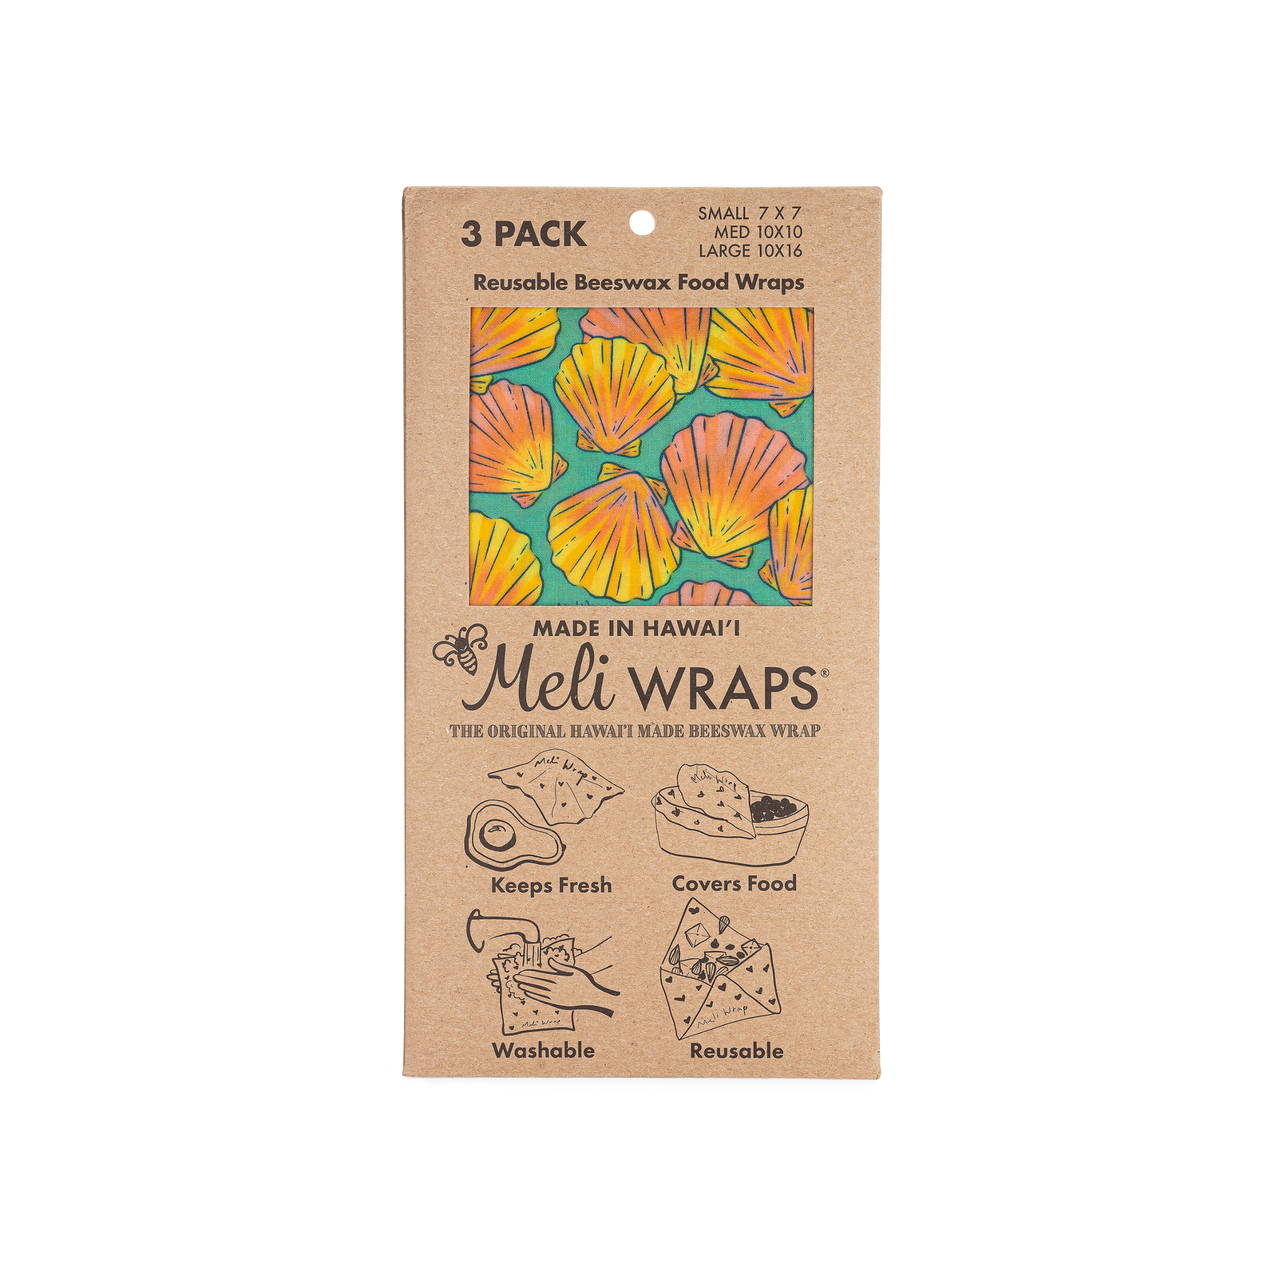 MELI WRAPS REUSABLE BEESWAX FOOD WRAPS in SHELL PATTERN